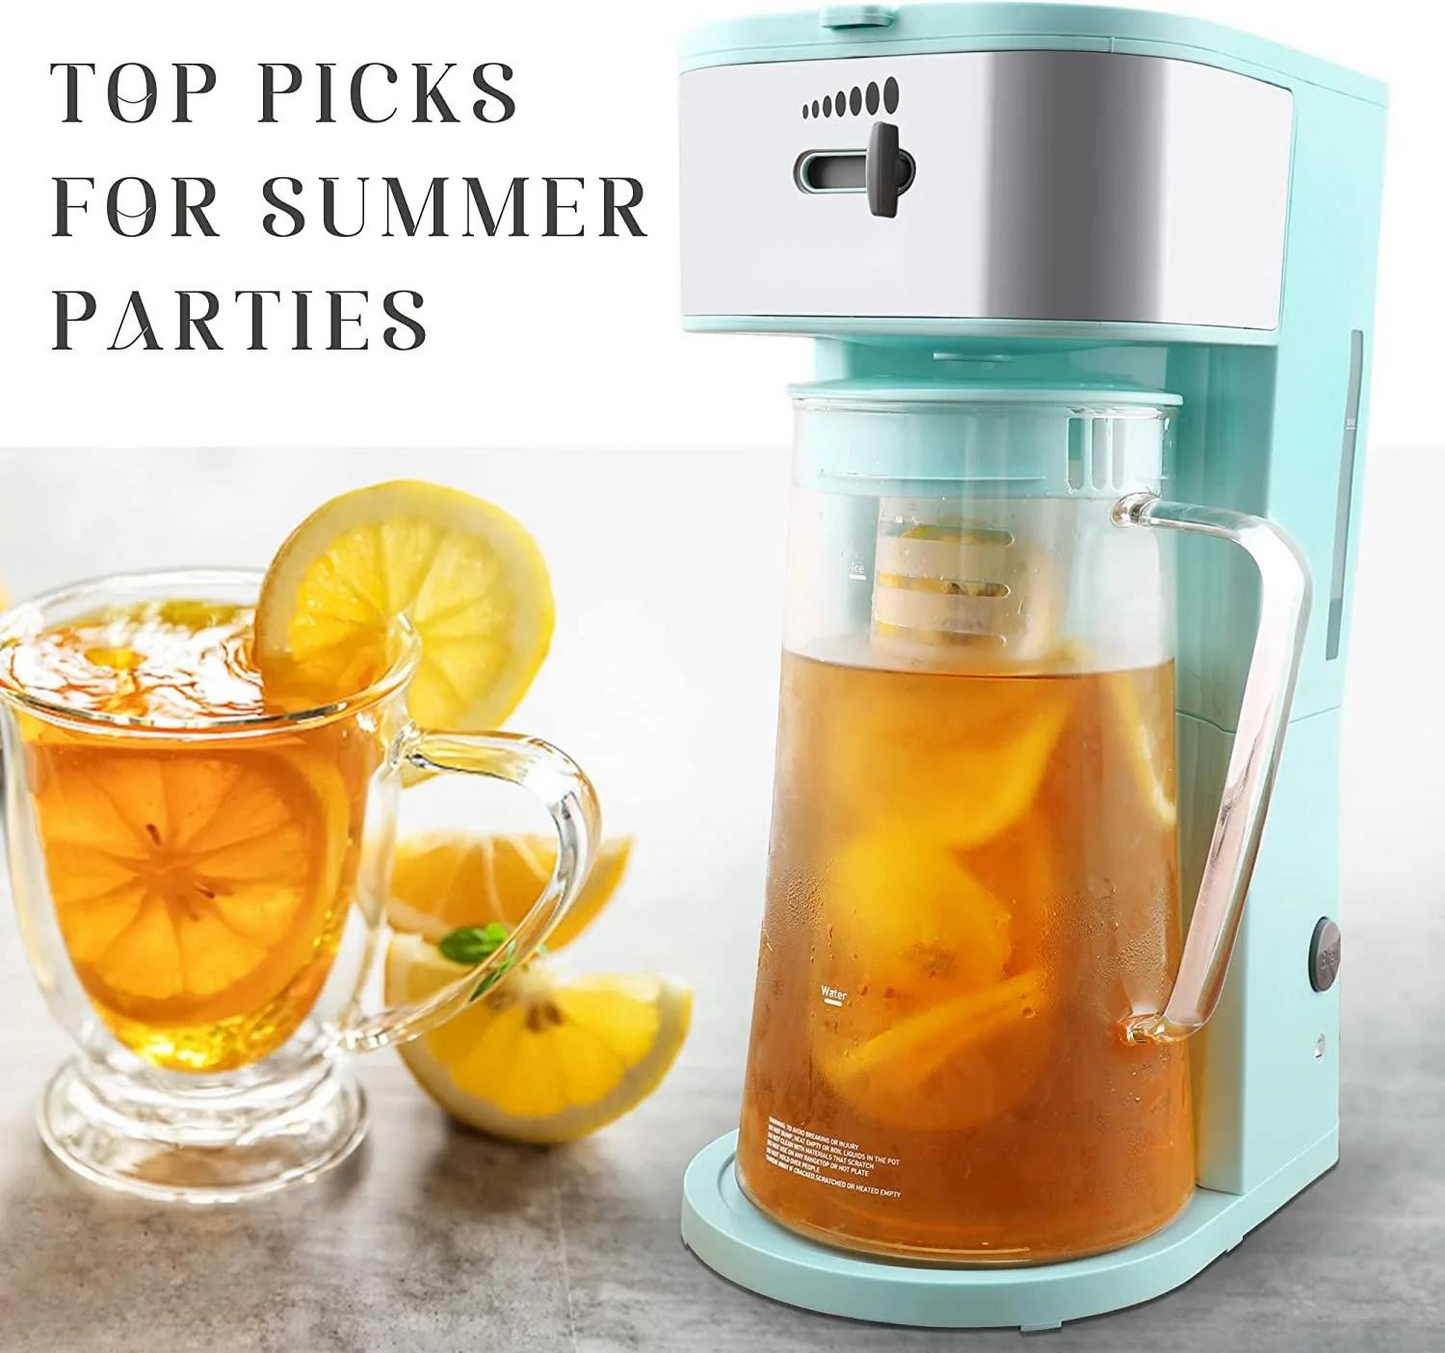 Iced Tea Maker with Upgrade 3 Quart Infusion Glass Pitcher,Ice Tea Maker with Strength Selector for Hot/Cold Water, Suitable For Customized Sweet Tea, Perfect for Summer Parties